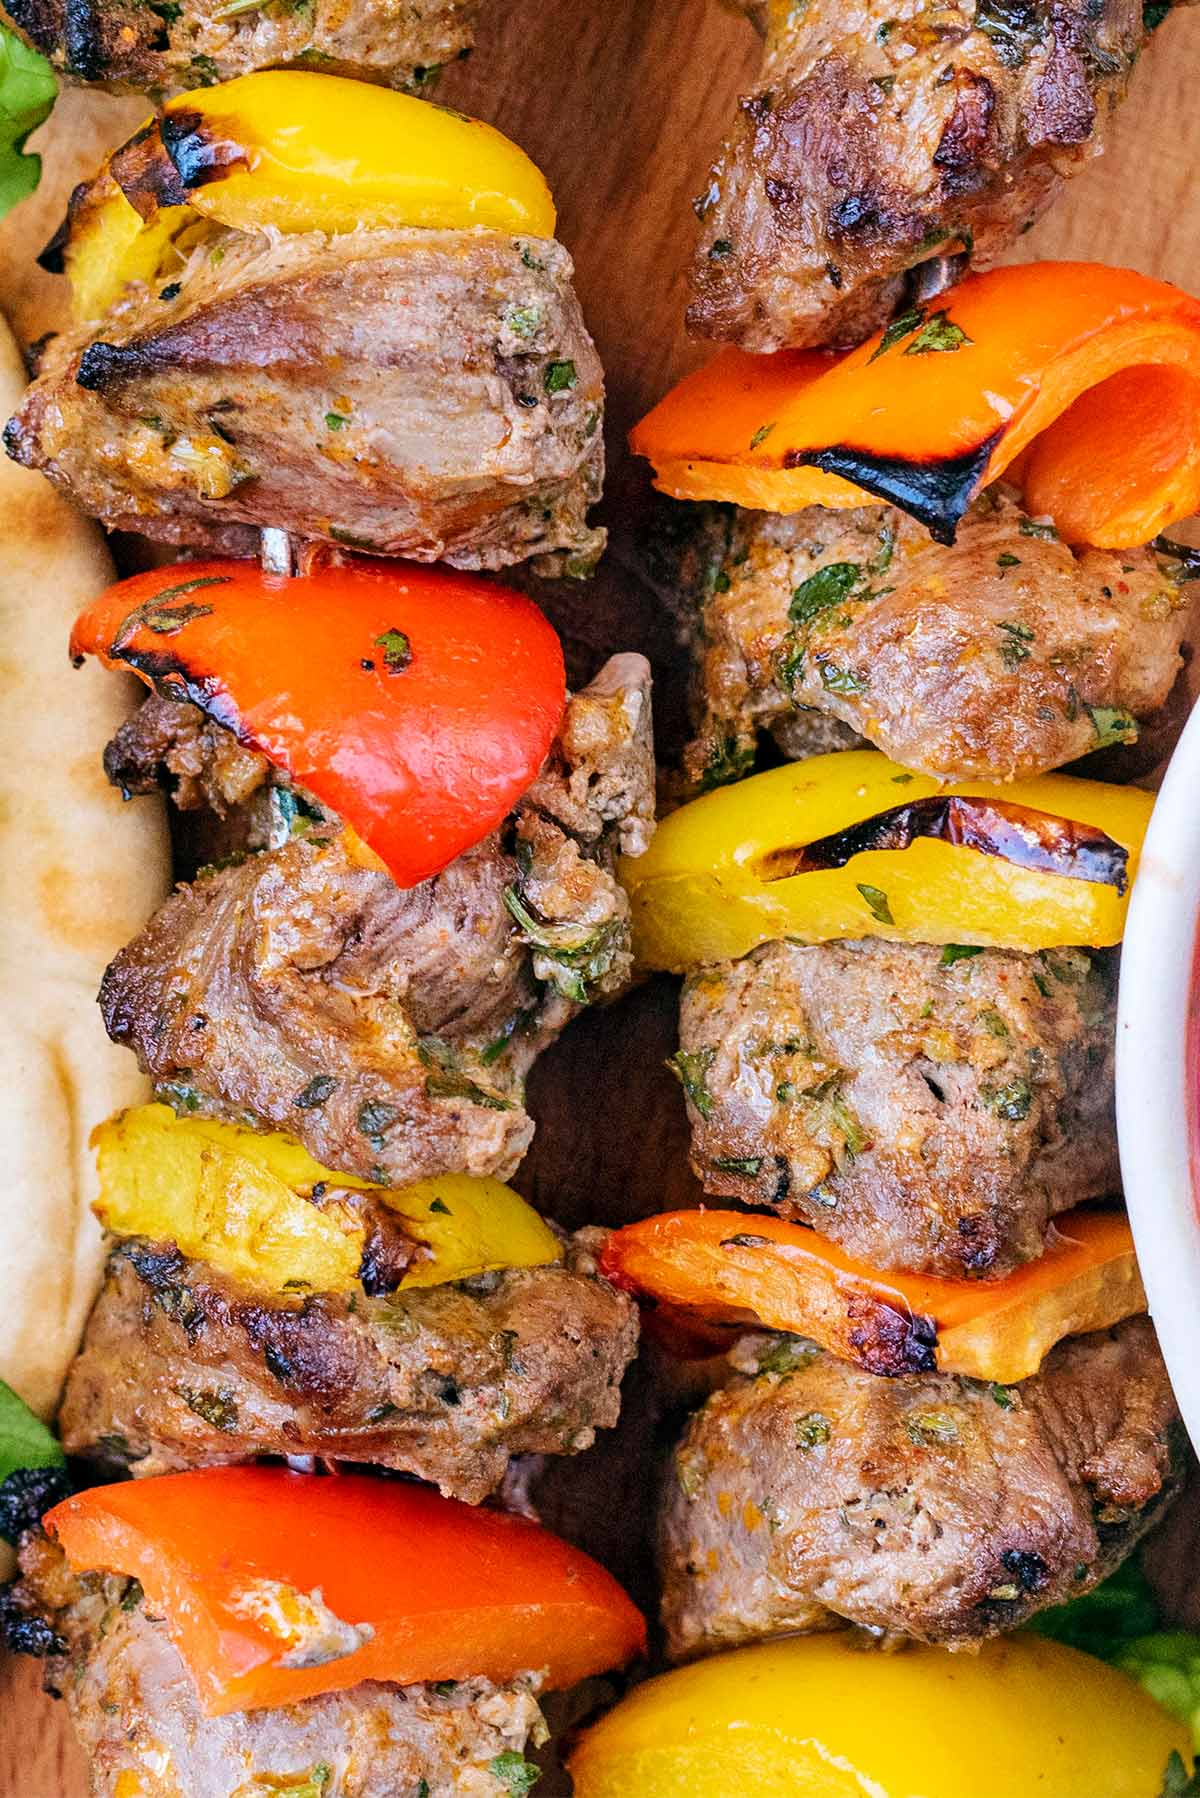 Chunks of lamb and bell pepper on skewers.